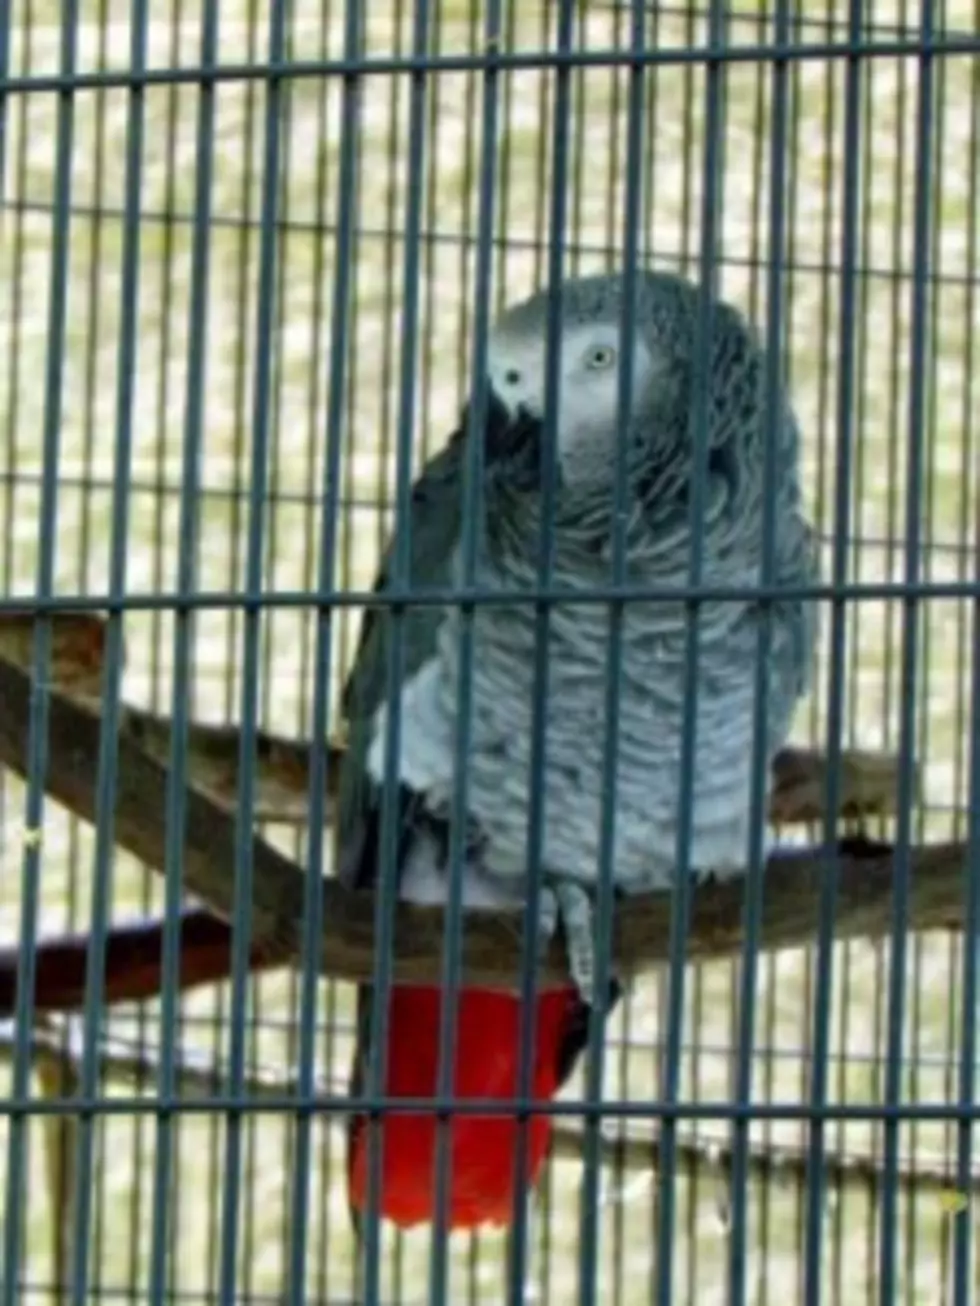 Brutus the Parrot Returned to Cape May County Zoo